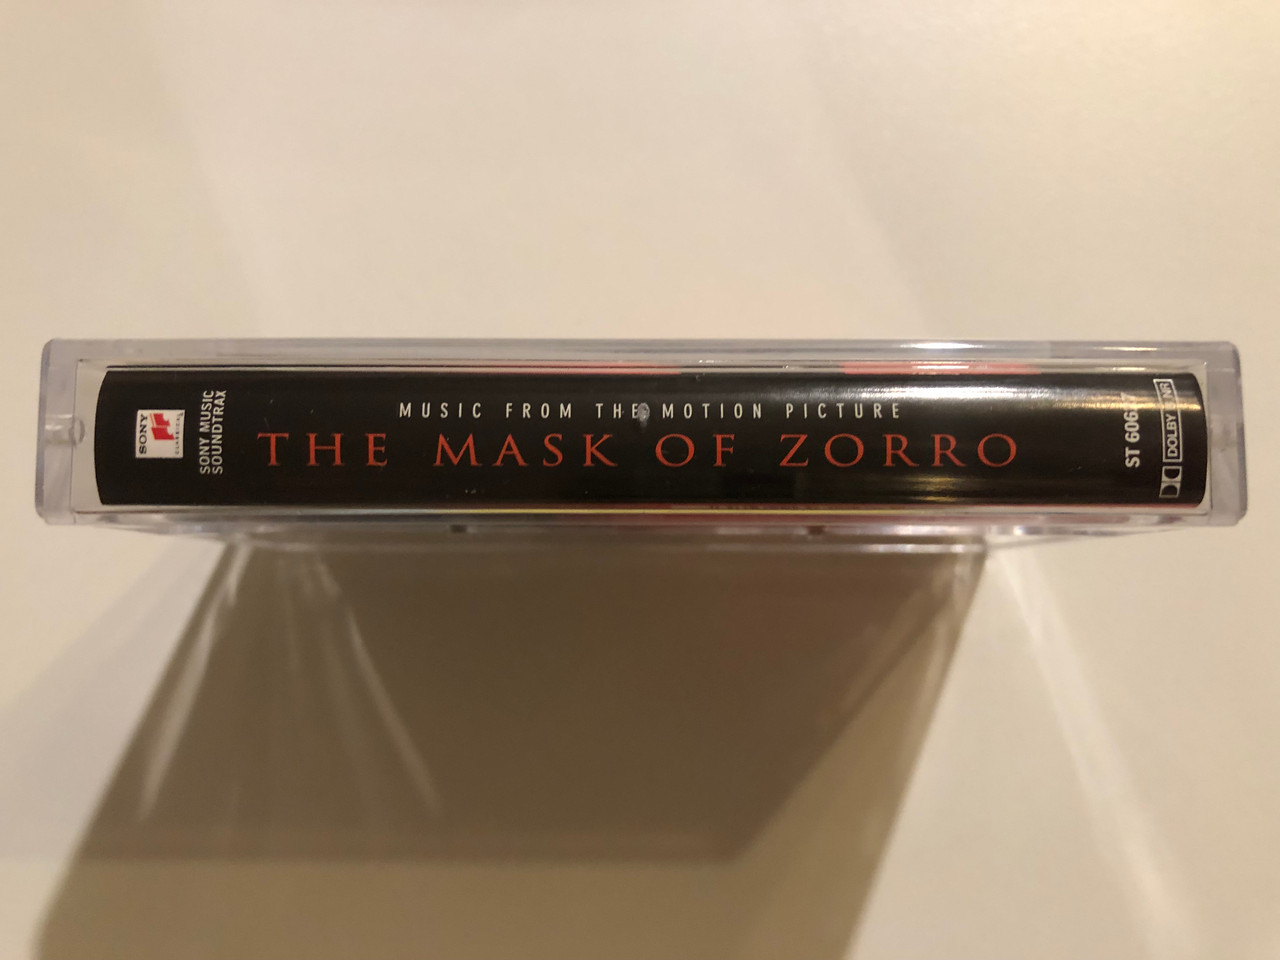 https://cdn10.bigcommerce.com/s-62bdpkt7pb/products/0/images/265419/The_Mask_Of_Zorro_Music_From_The_Motion_Picture_-_Music_Composed_And_Conducted_By_James_Horner_Antonio_Banderas_Anthony_Hopkins_Sony_Classical_Audio_Cassette_1998_ST_60627_2__26900.1675244685.1280.1280.JPG?c=2&_gl=1*oh6gm2*_ga*MjA2NTIxMjE2MC4xNTkwNTEyNTMy*_ga_WS2VZYPC6G*MTY3NTIzNzgyNC43NDAuMS4xNjc1MjQ0NTAxLjIyLjAuMA..